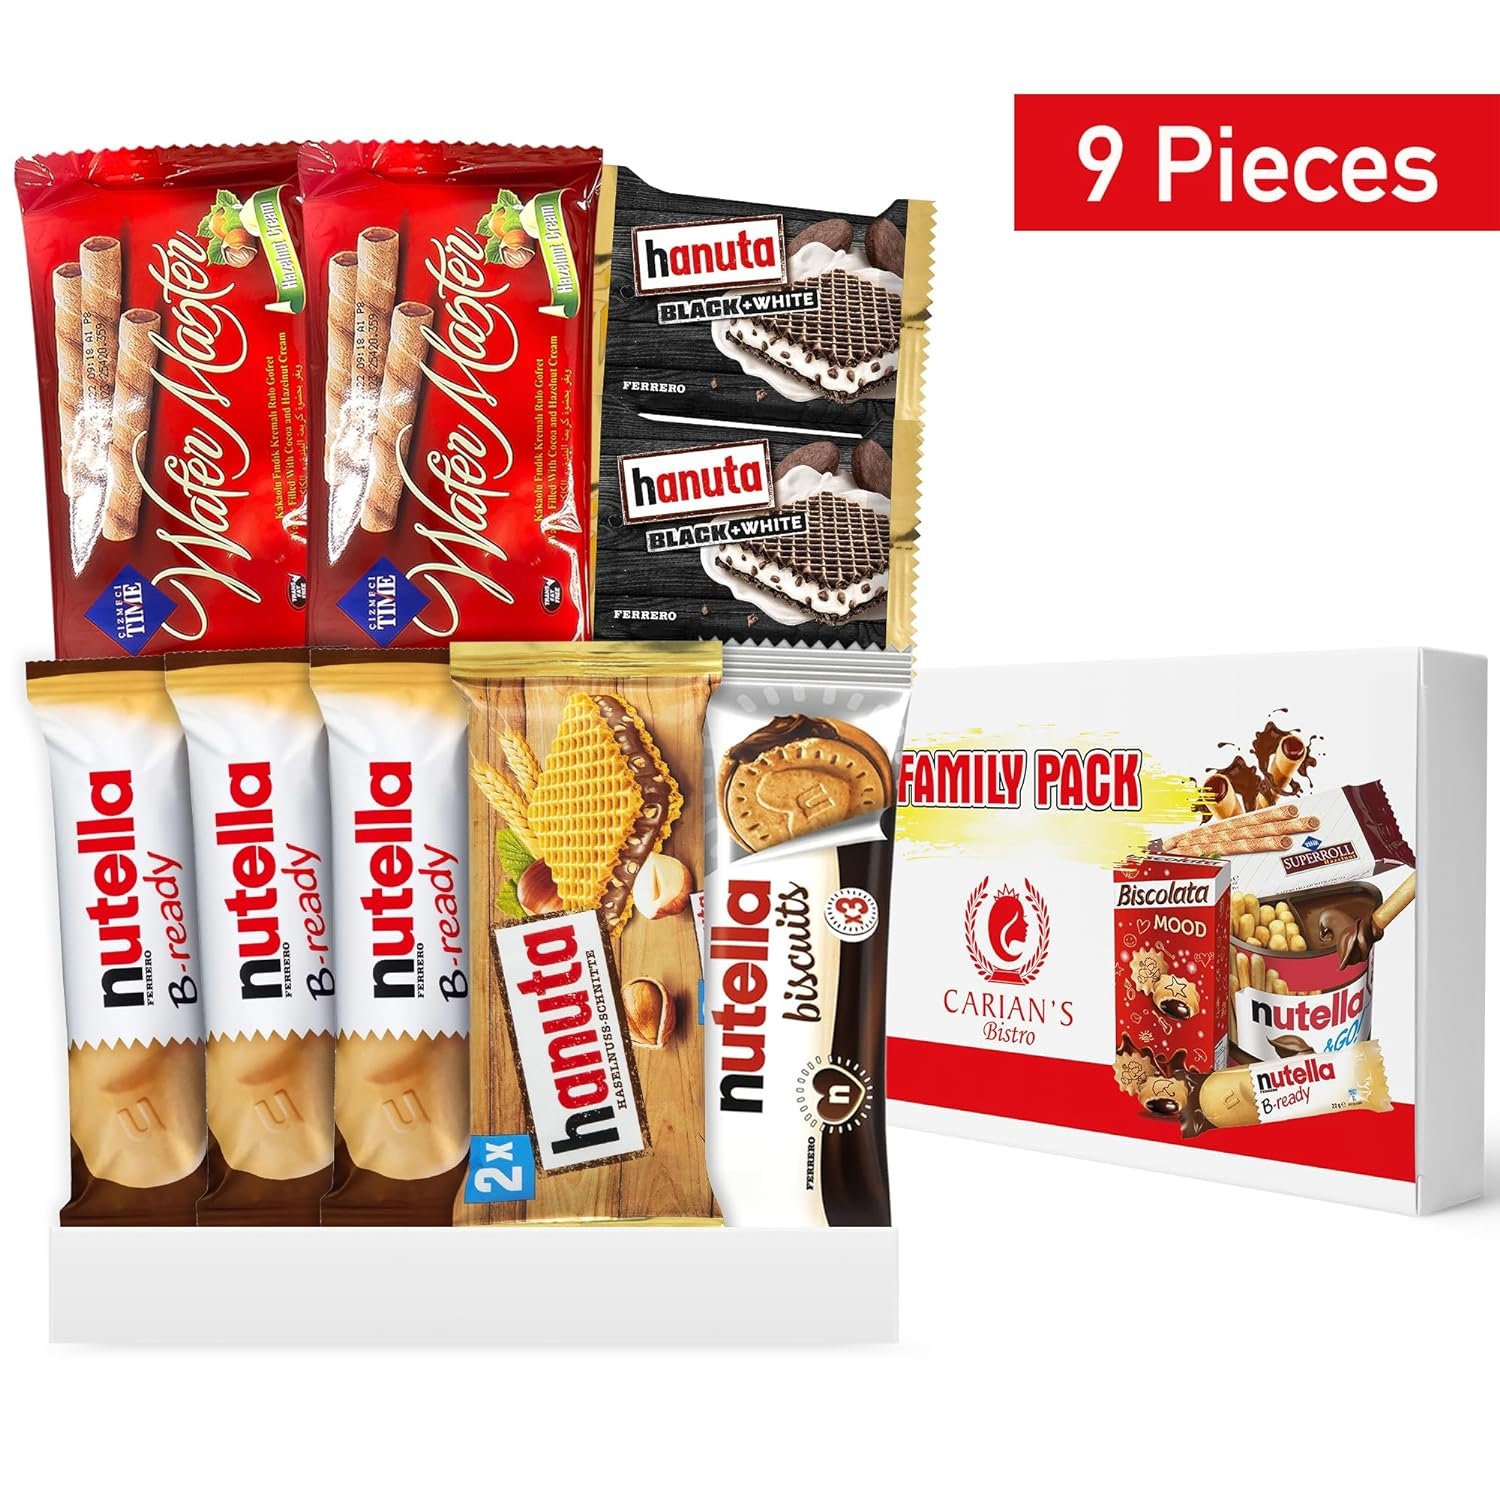 Nutella Snack Pack,b-ready,biscuits,hanuta,roll Wafers,perfect Snacks for  Kids and Adults,9 Full Size Snack,24pcs - Etsy